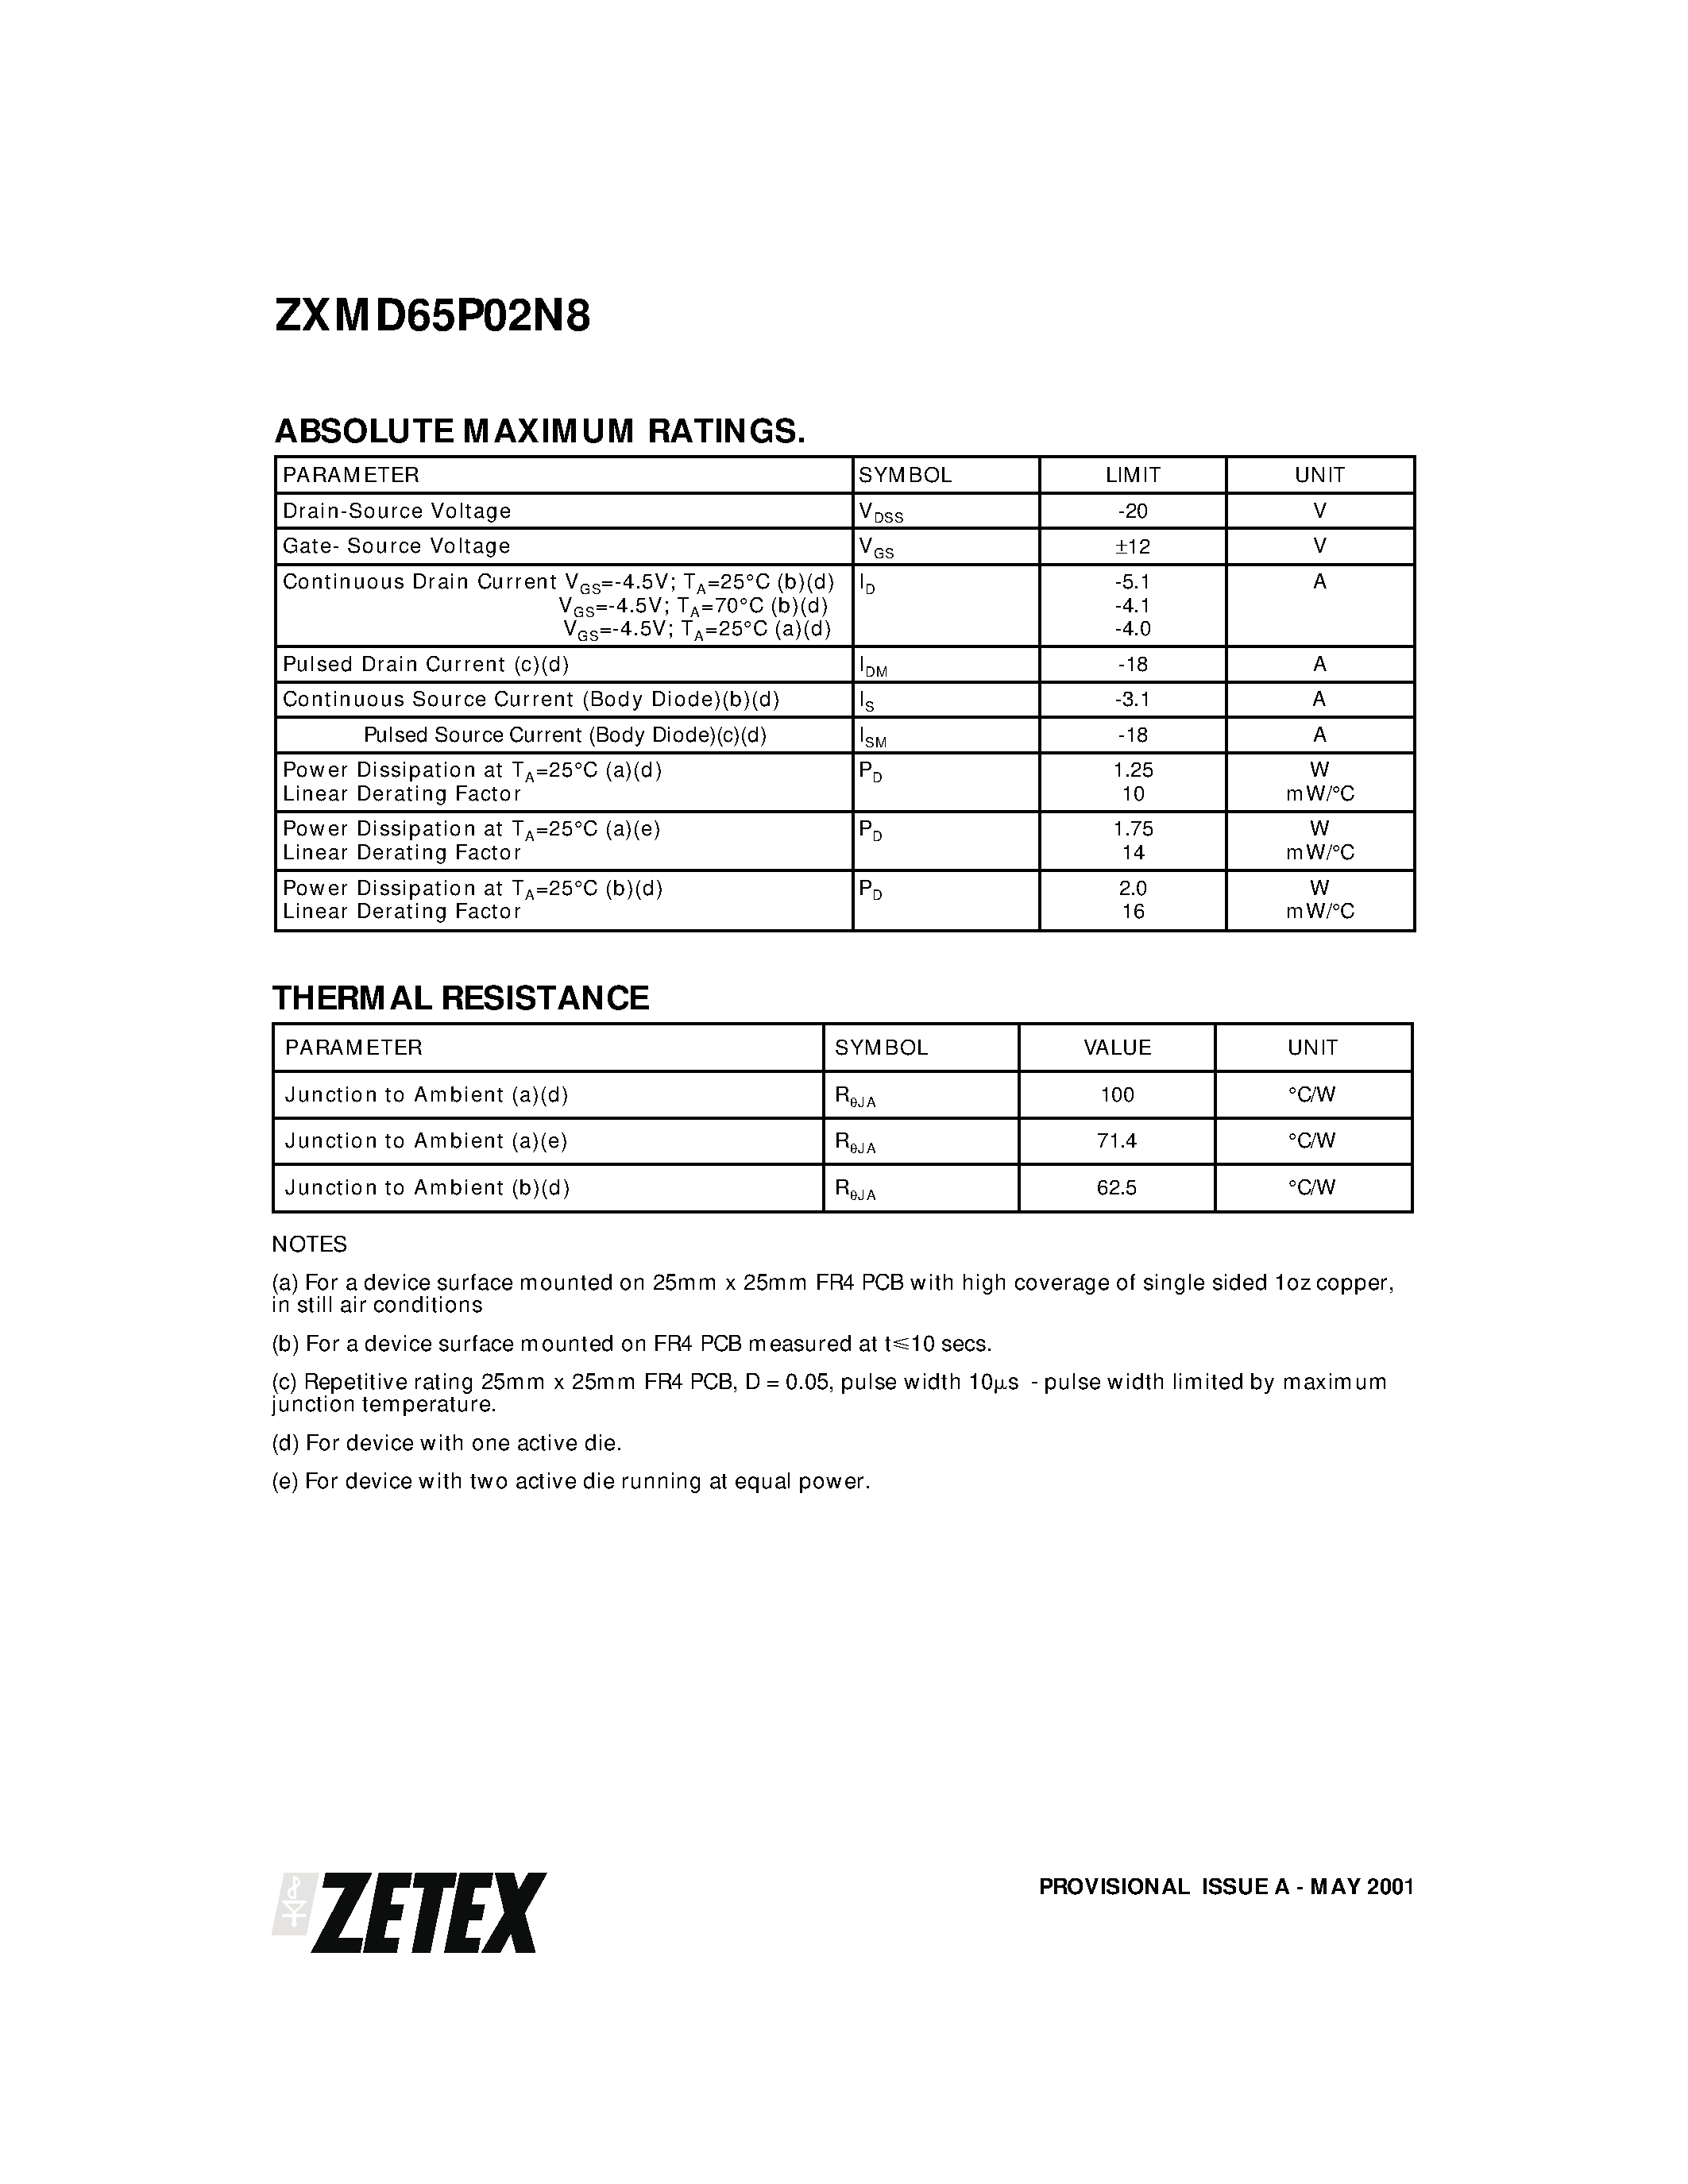 Datasheet ZXMD65P02N8 - DUAL 20V P-CHANNEL ENHANCEMENT MODE MOSFET page 2